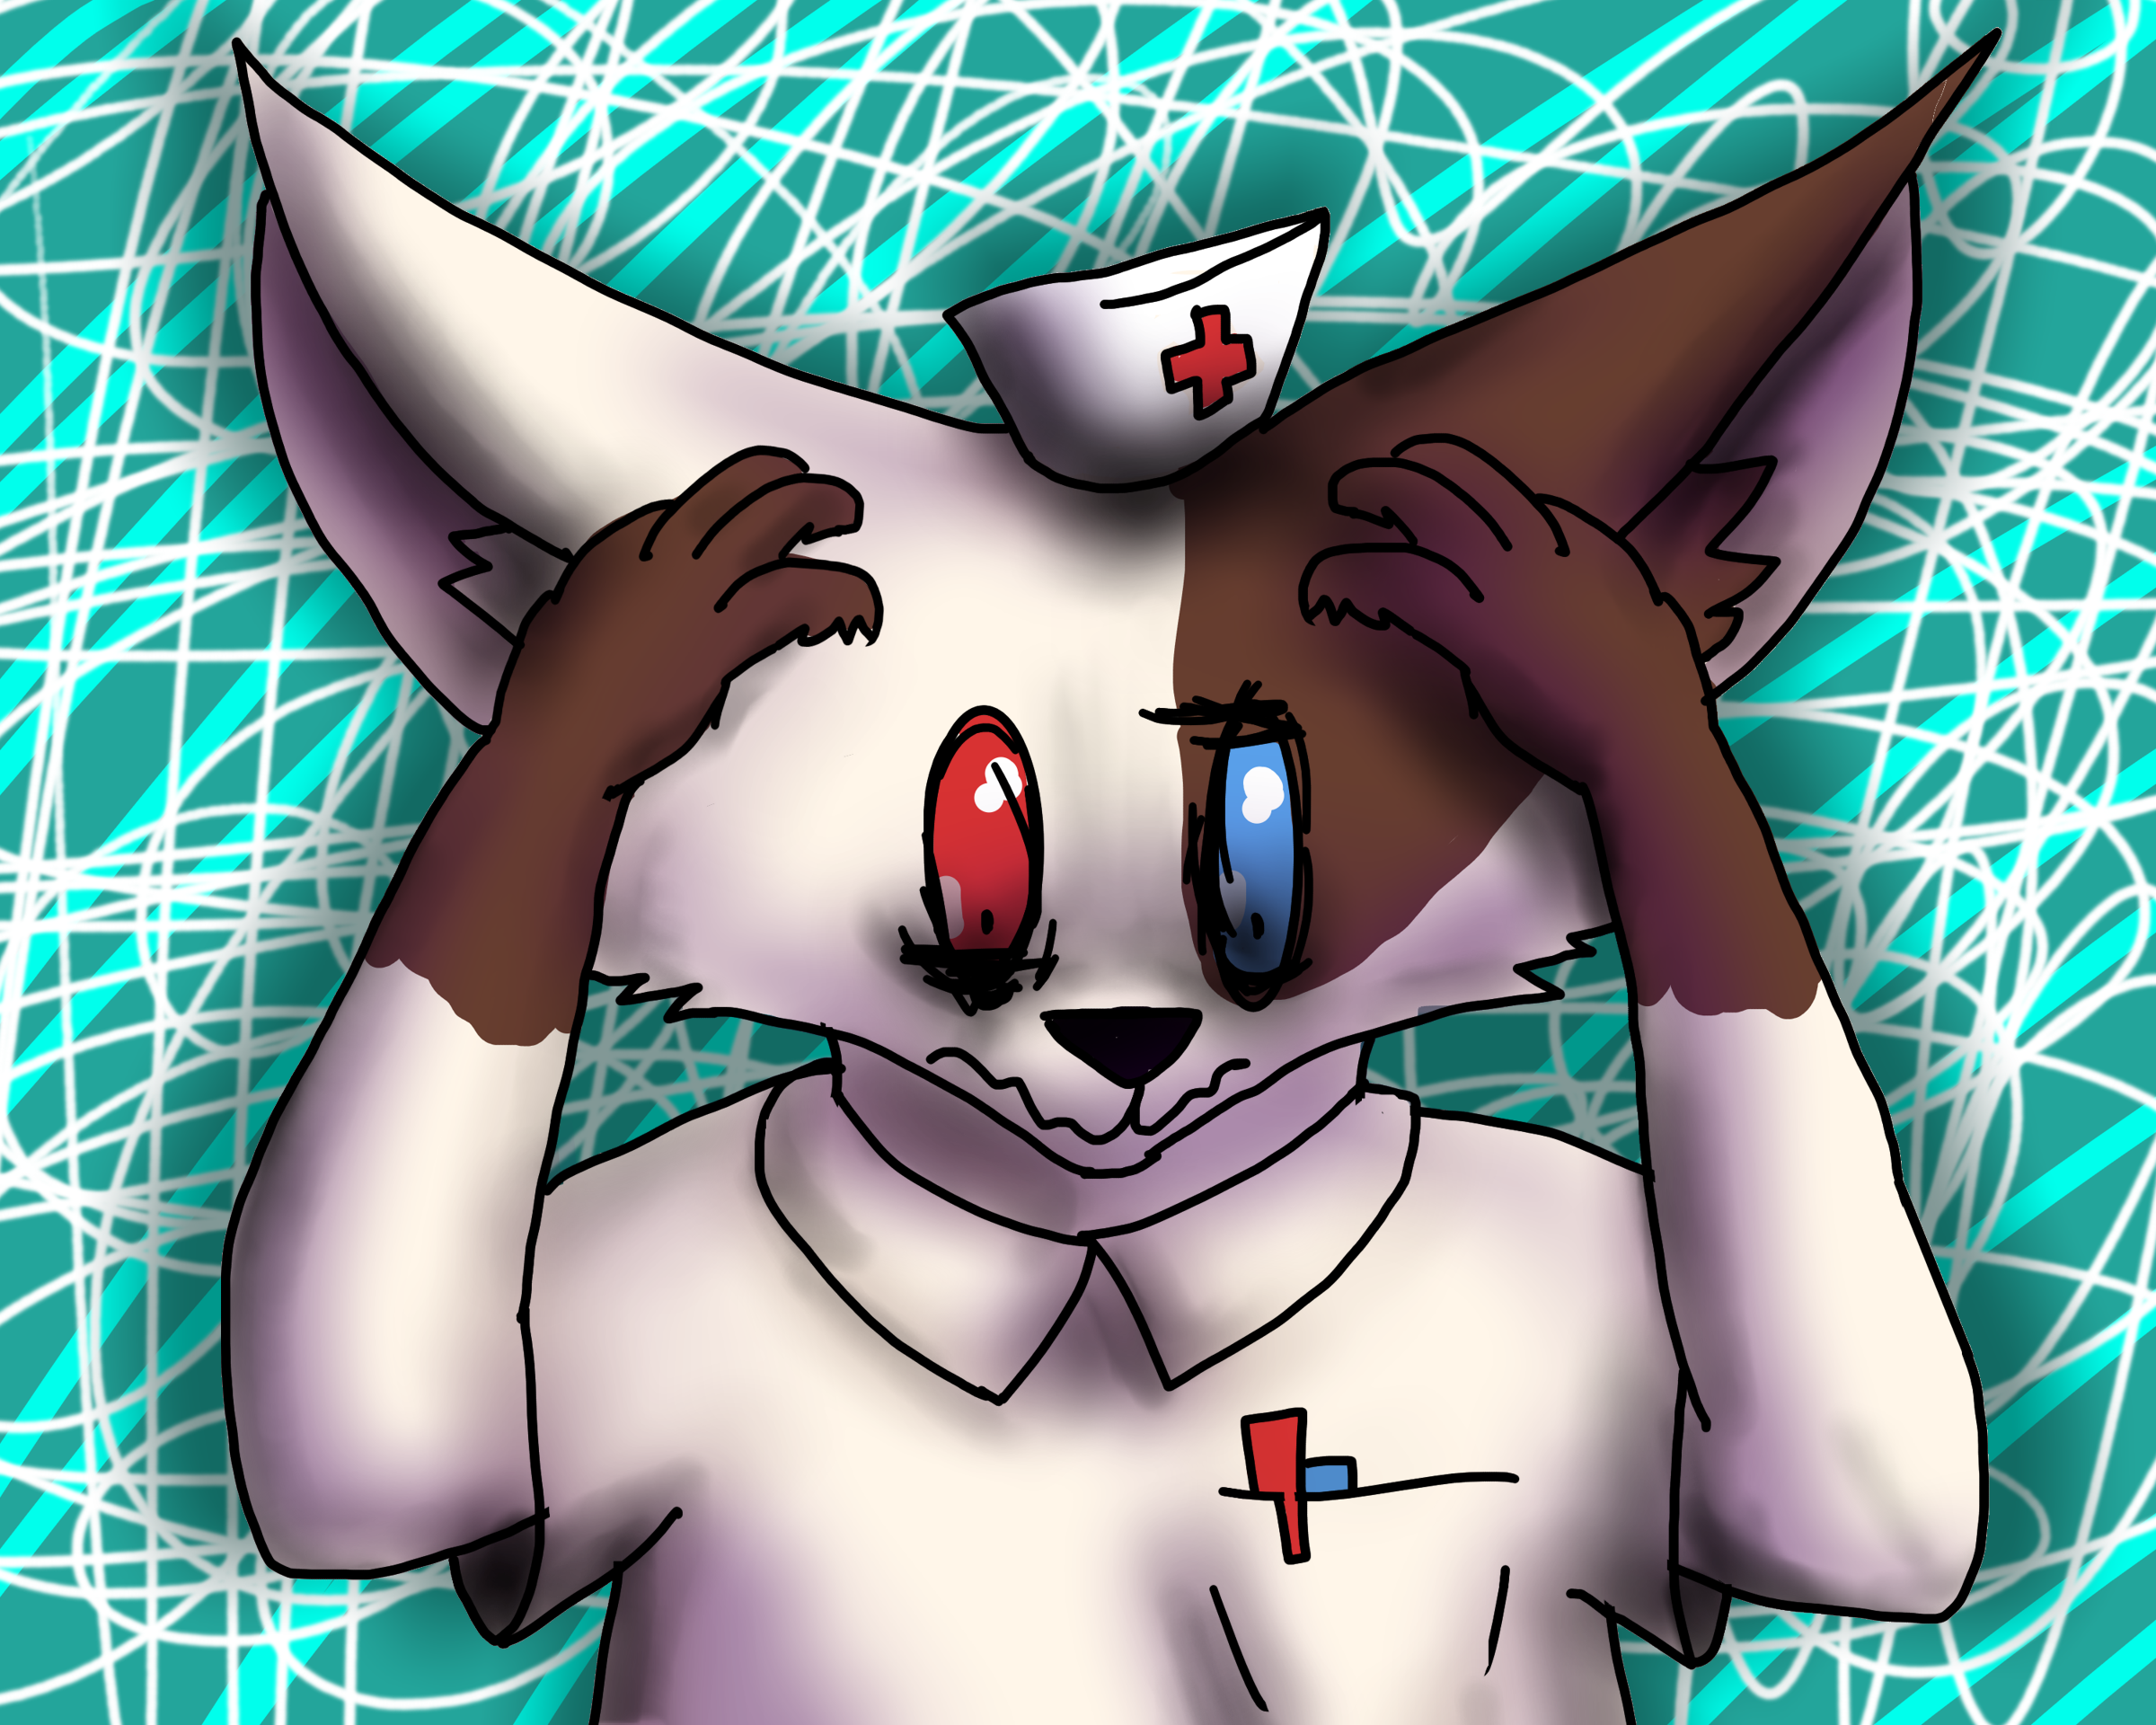 Image of an anthropropmorphic cat in a nurses uniform with their hands on their head and shadows under their eyes